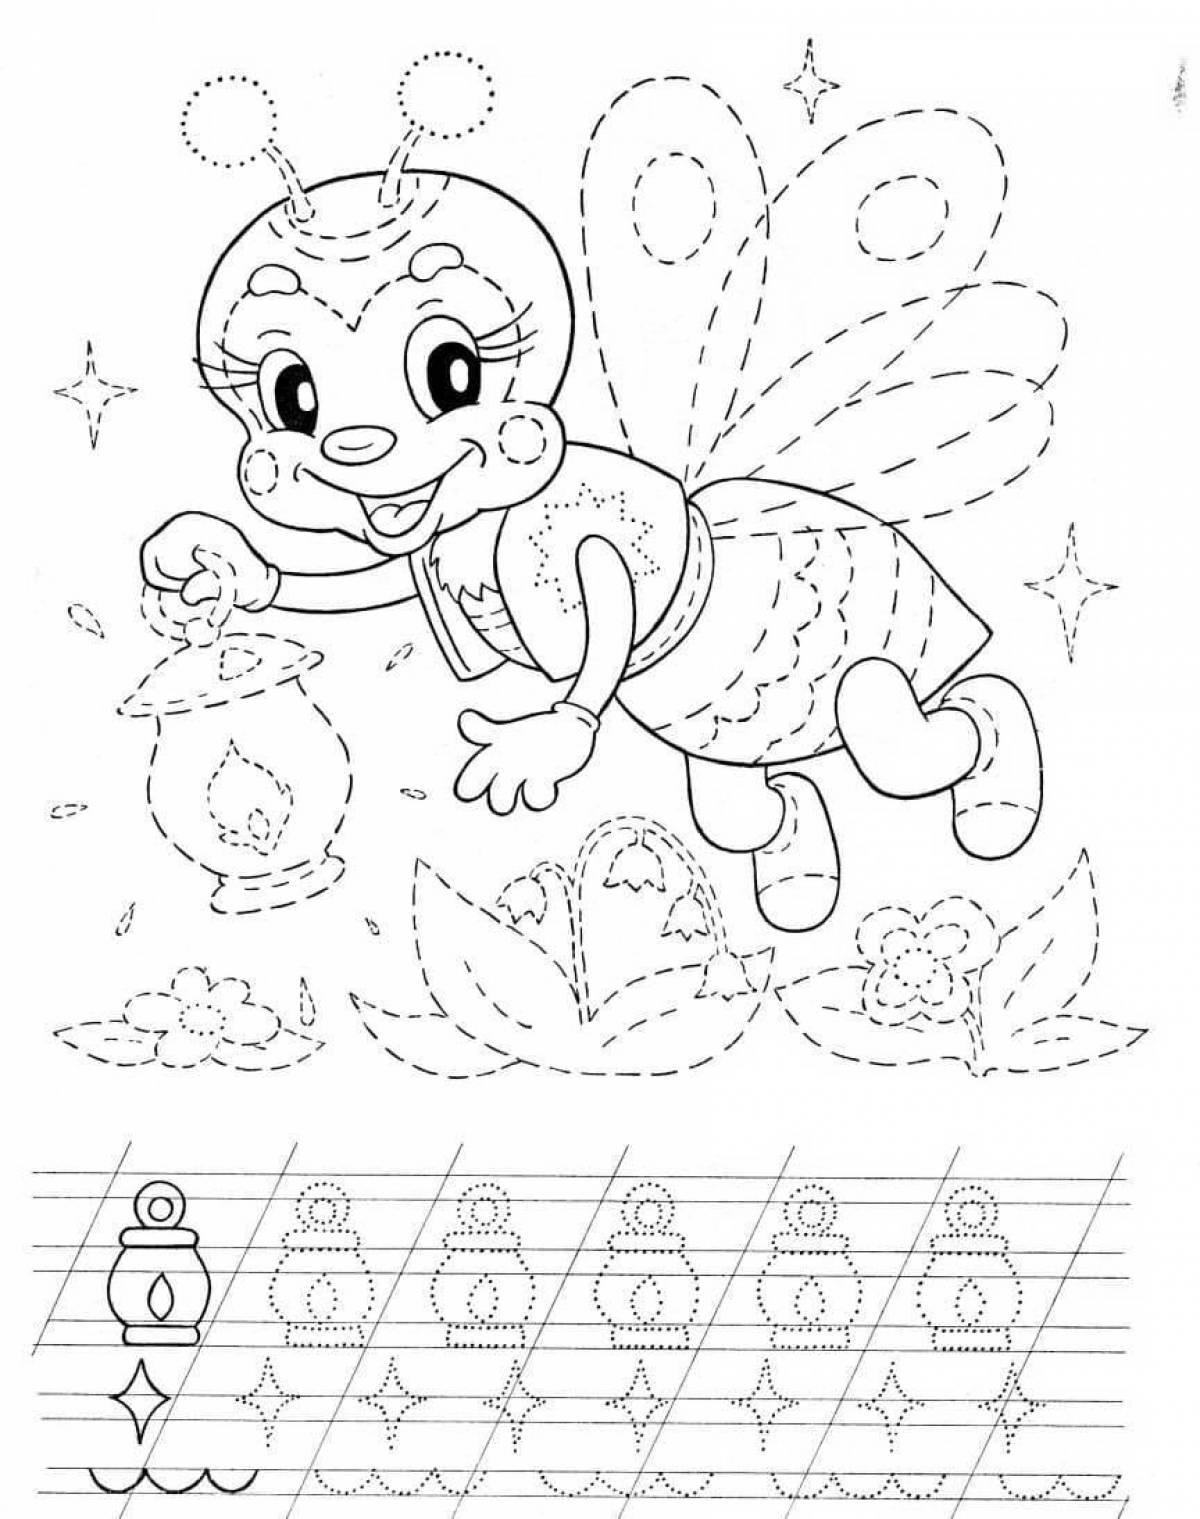 Coloring book for preschoolers 6-7 years old